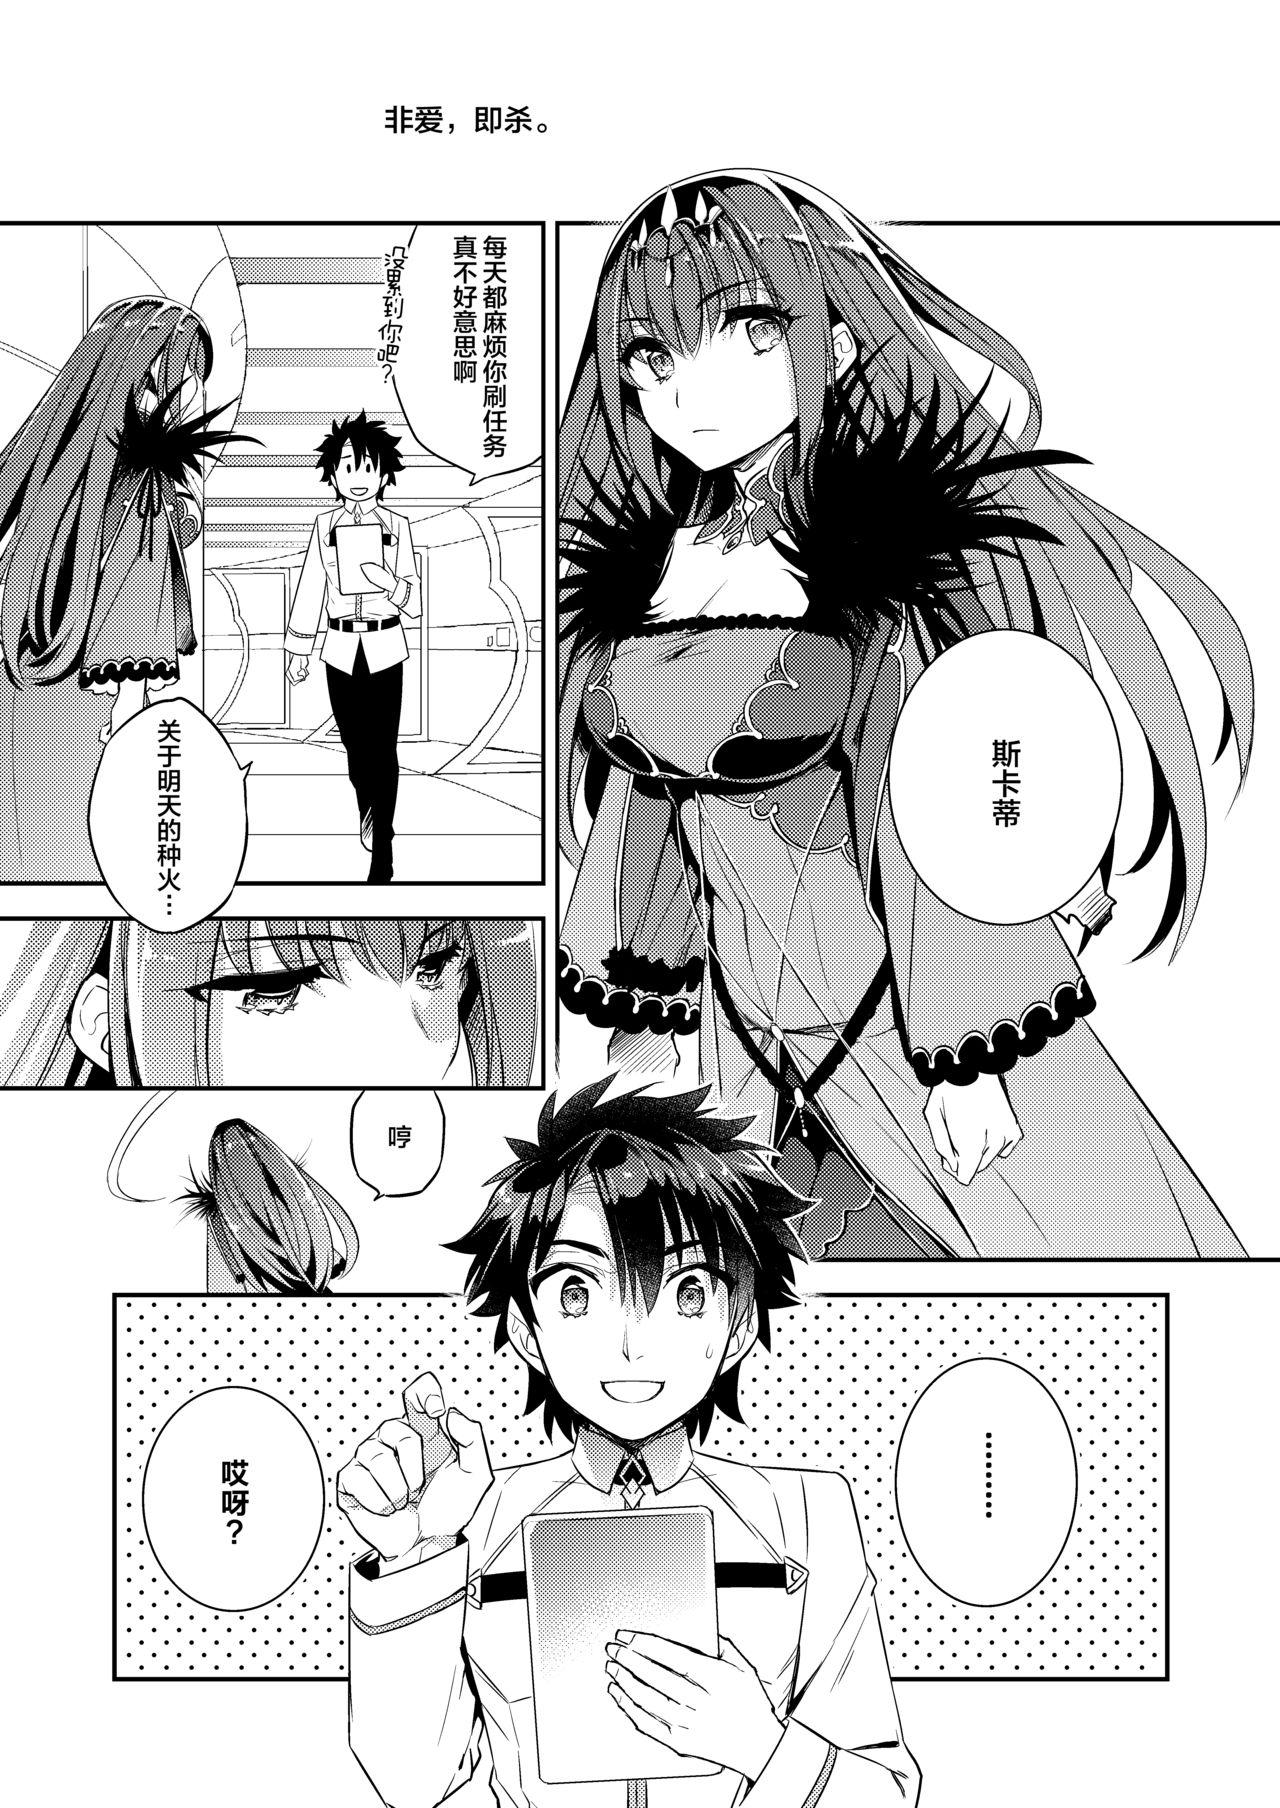 Lesbian Sex C9-39 W Scathach to - Fate grand order Dick Suckers - Page 3